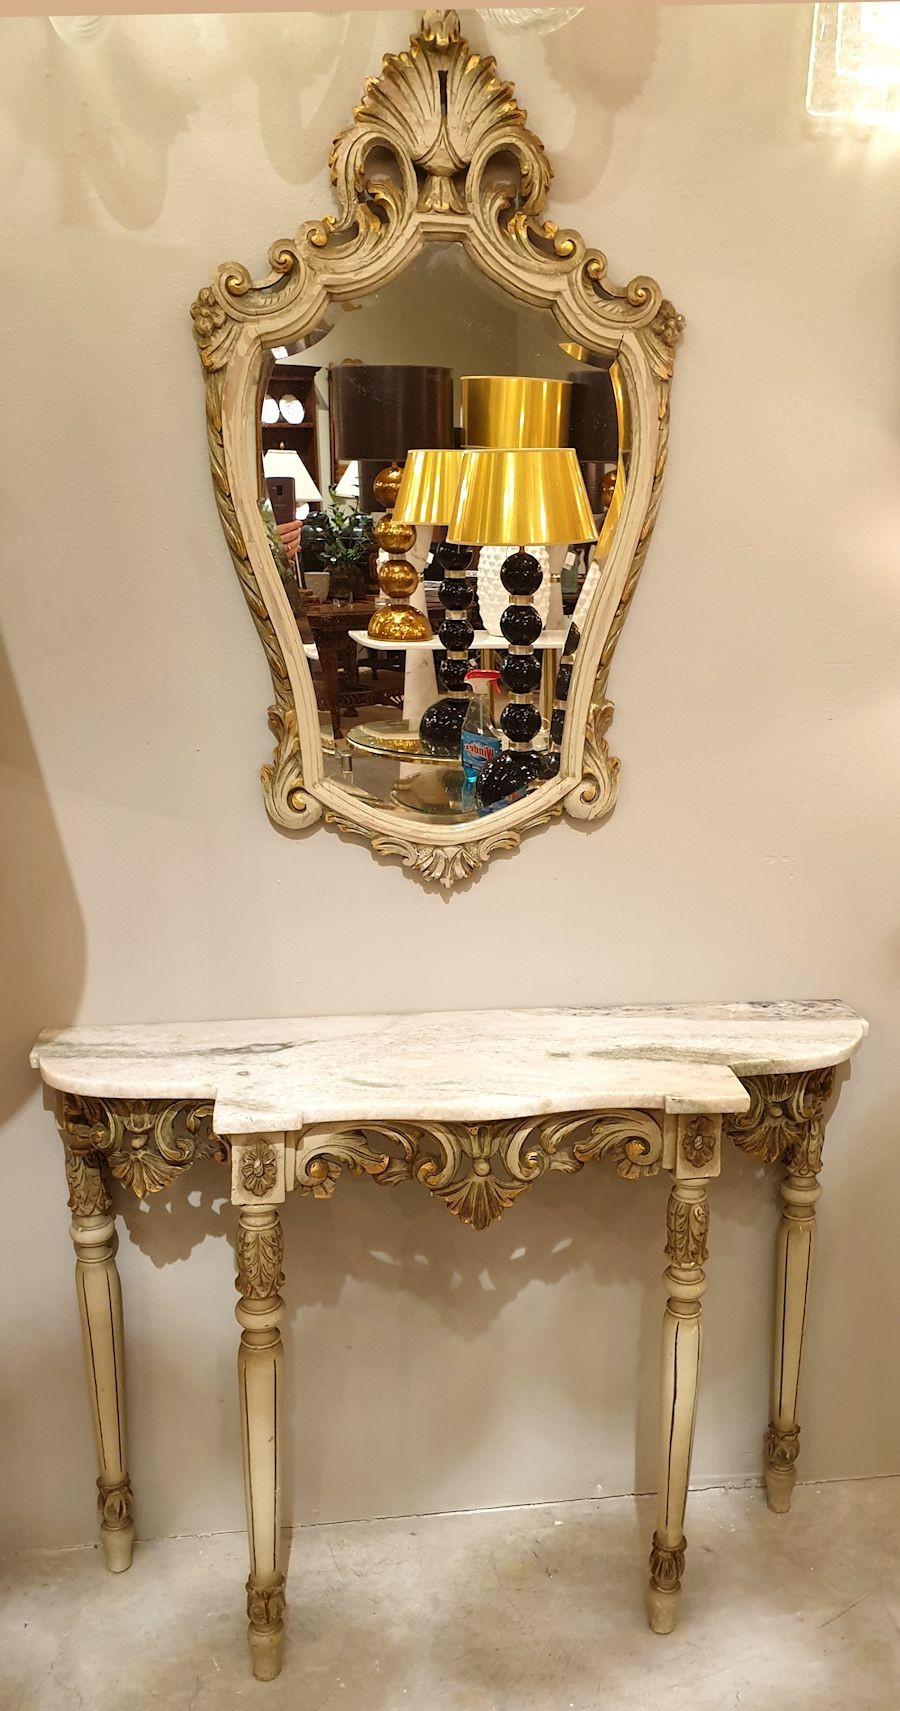 Set composed of one decorative console table, with four legs, and a matching large wall mirror. Louis XV style, France 1920s or earlier.
The Neoclassical console table and mirror set is made of gilt and light green paint wood.
The twentieth century